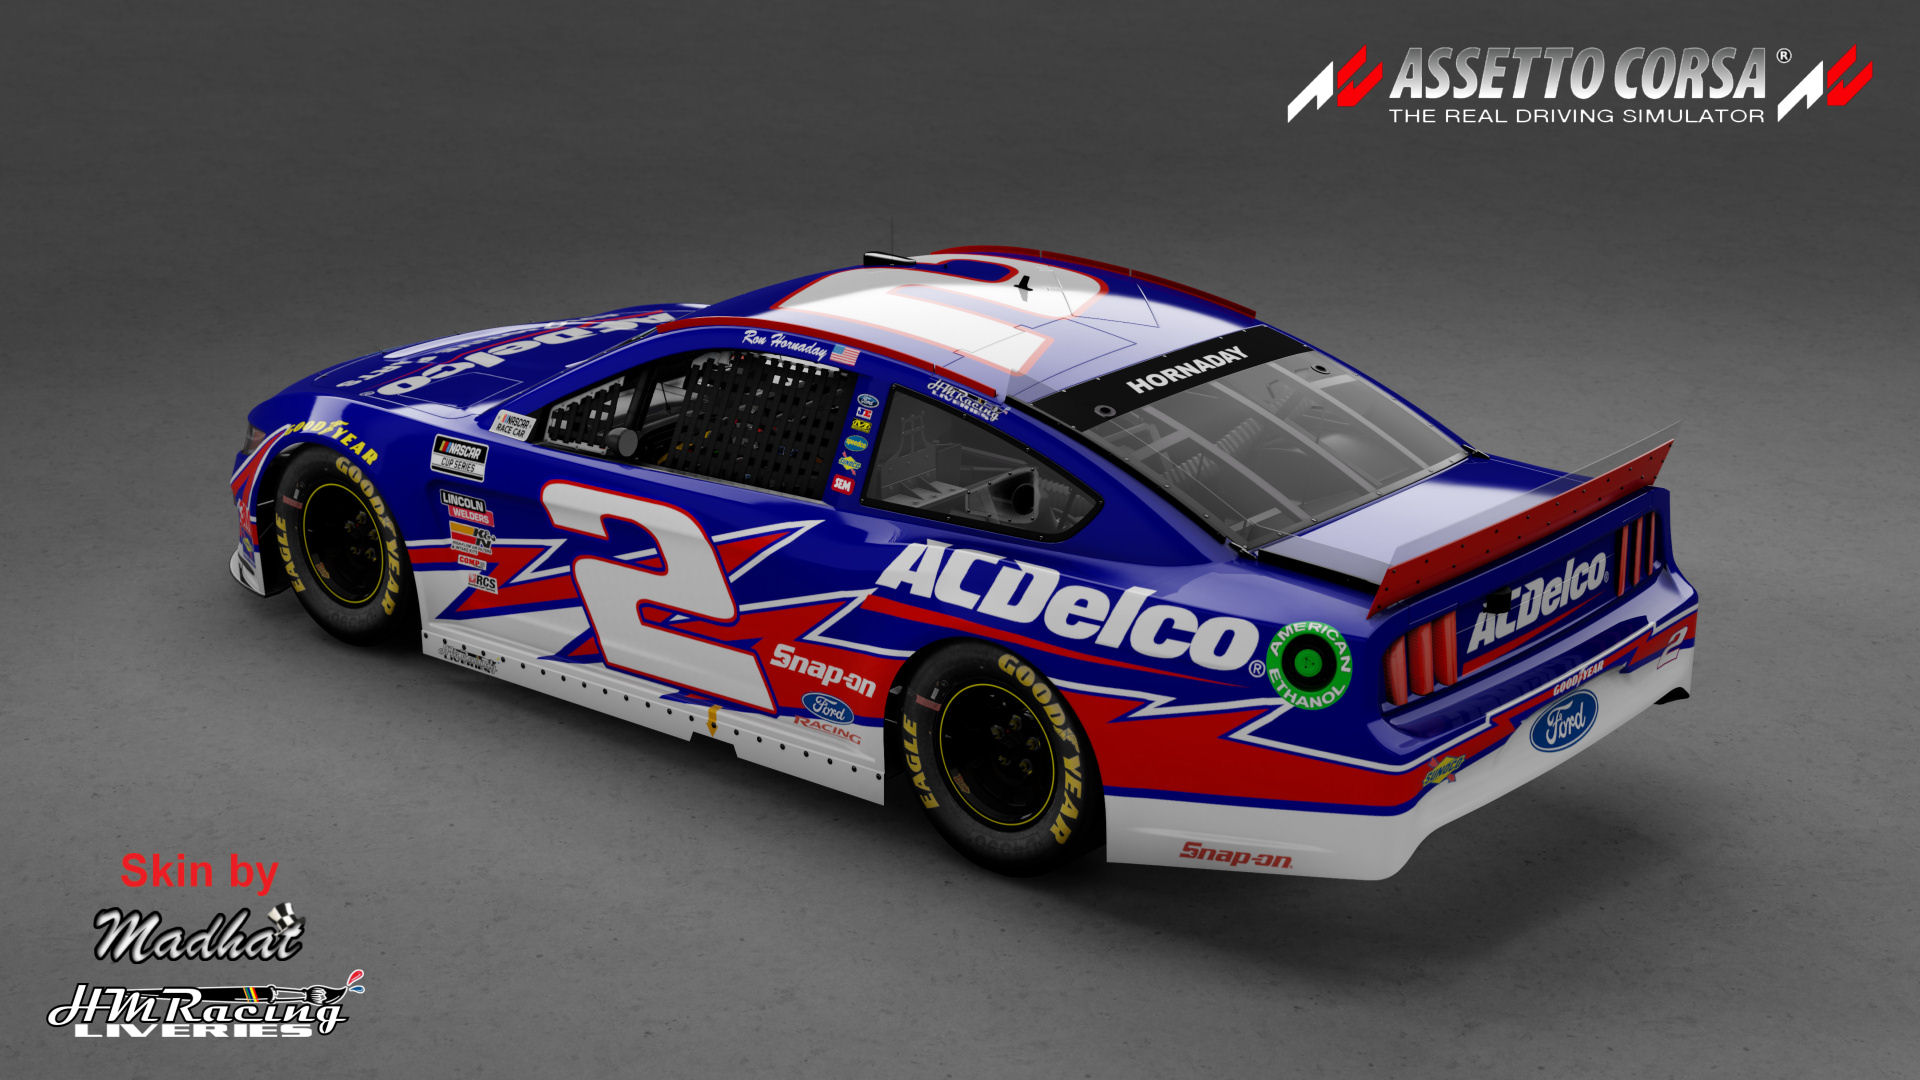 Ron Hornaday No2 ACDelco Mustang Nascar by Madhat HMRacing Liveries 04.jpg